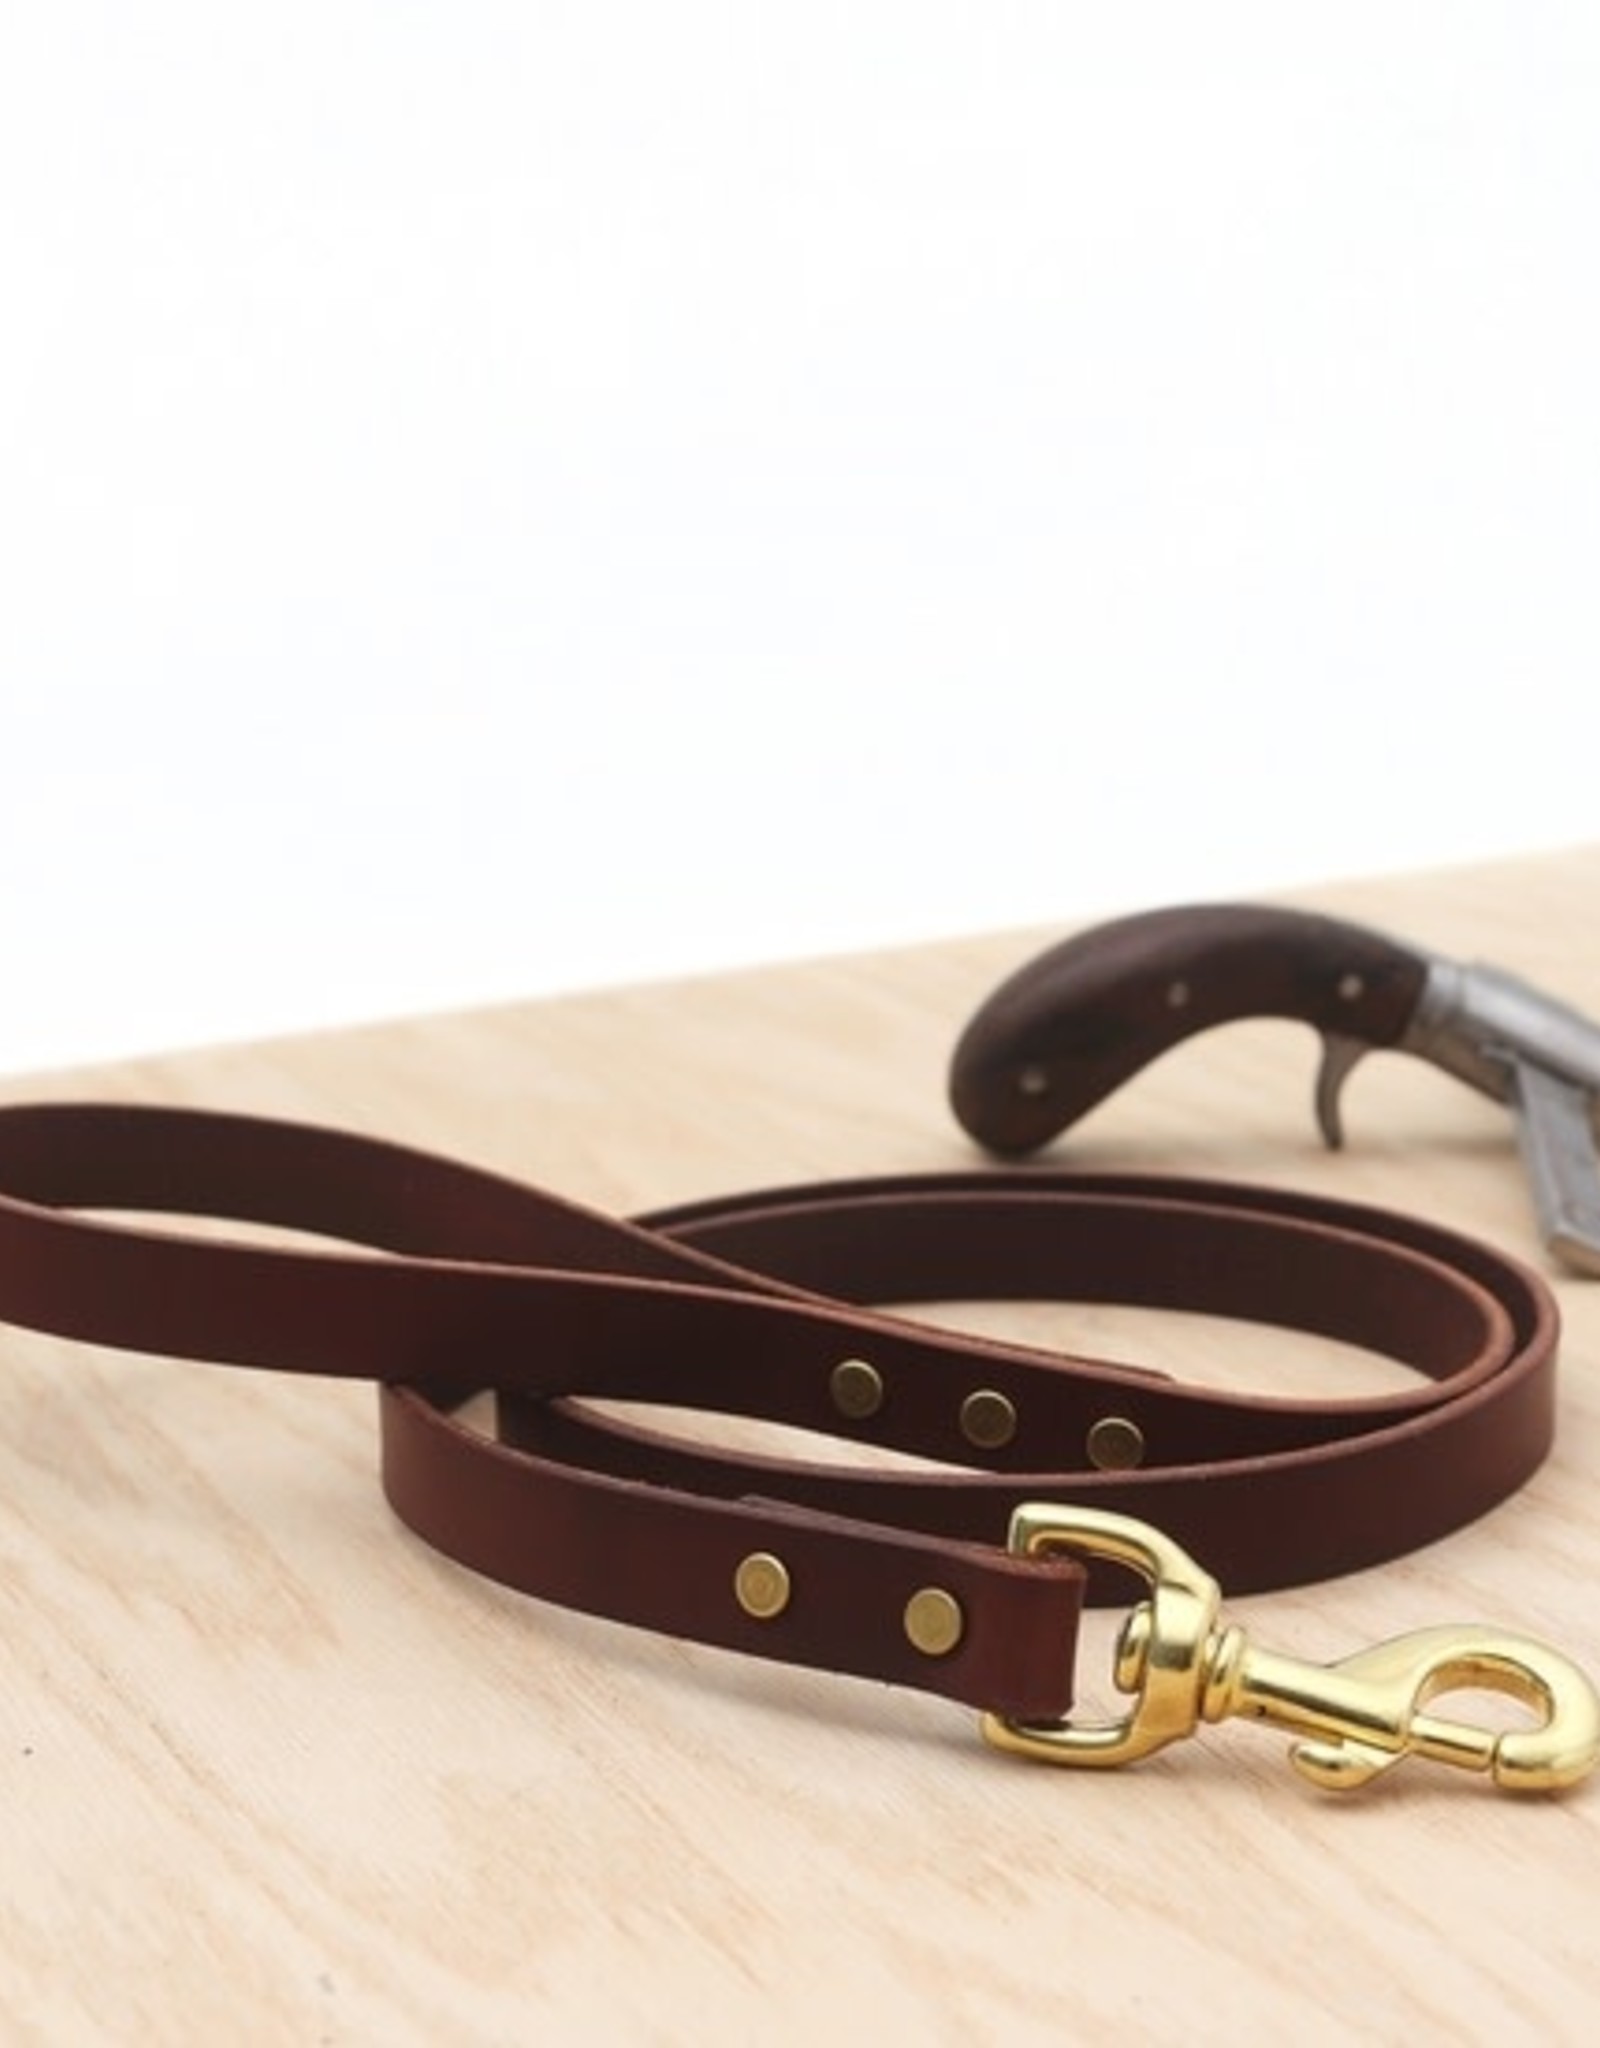 Mimi Green Leather Dog Leashes